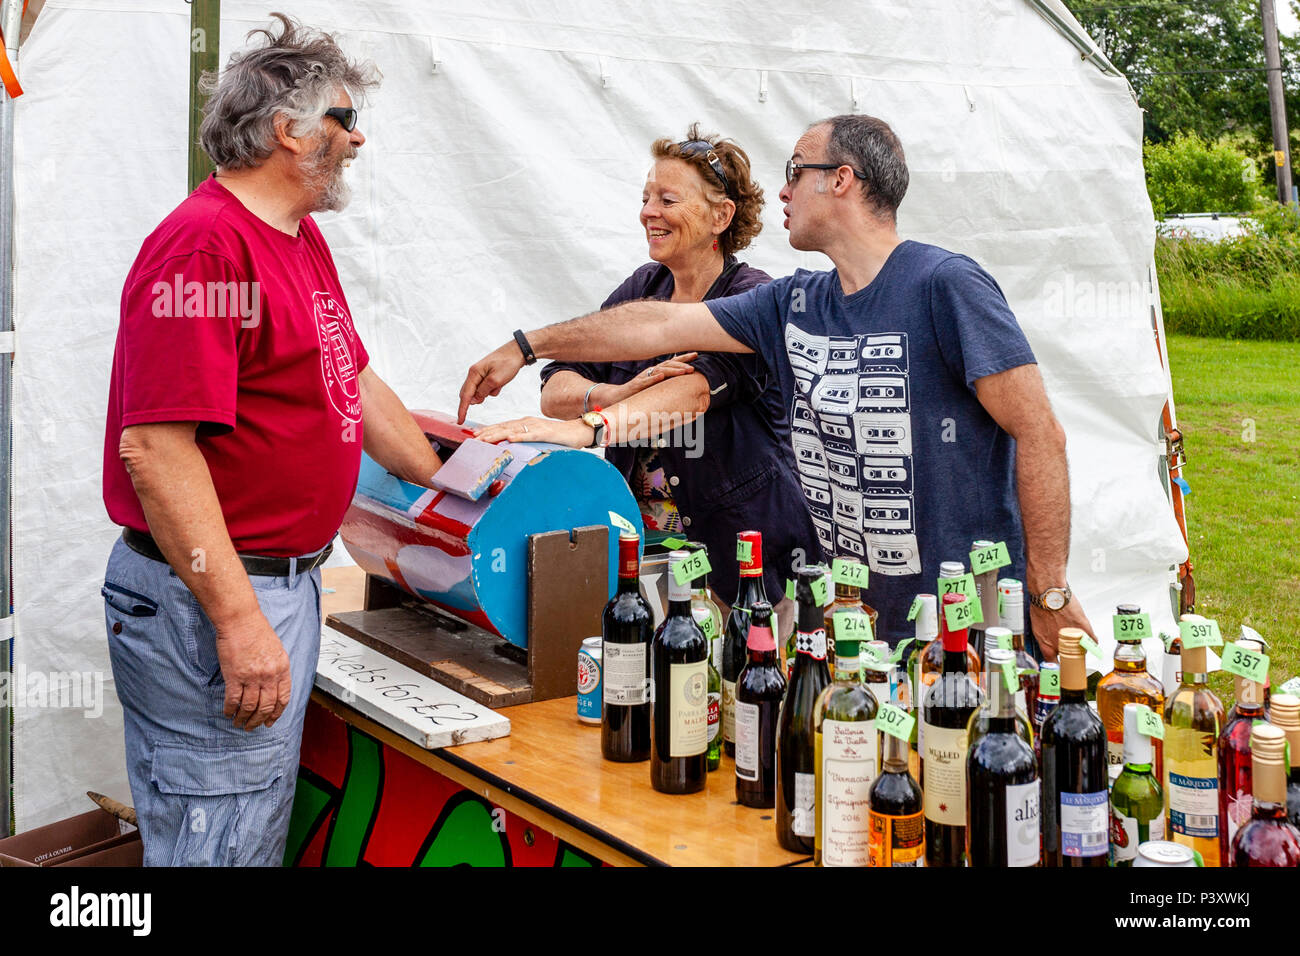 A Traditional Tombola Stall At The Annual High Hurstwood Village Fete, Sussex, UK Stock Photo